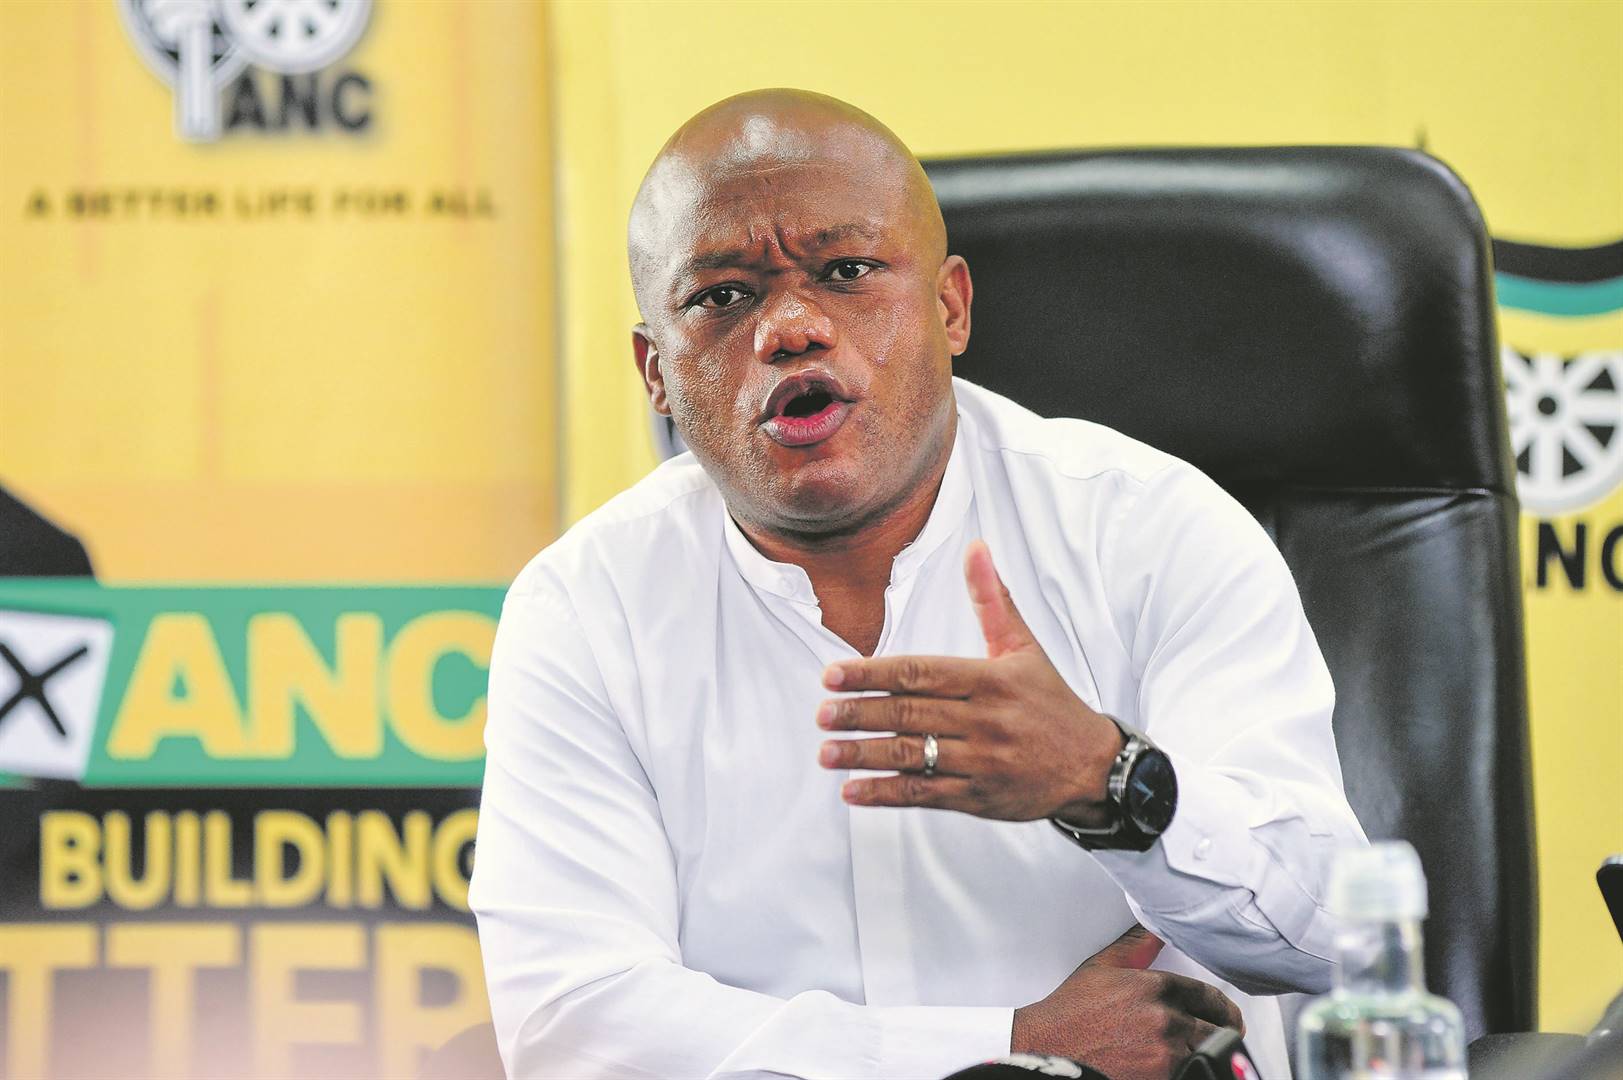 KwaZulu-Natal Premier Sihle Zikalala’s speech on Human Rights Day marked yet another attack on our hard-won freedoms from those within the governing party Photo: Darren stewart / gallo images